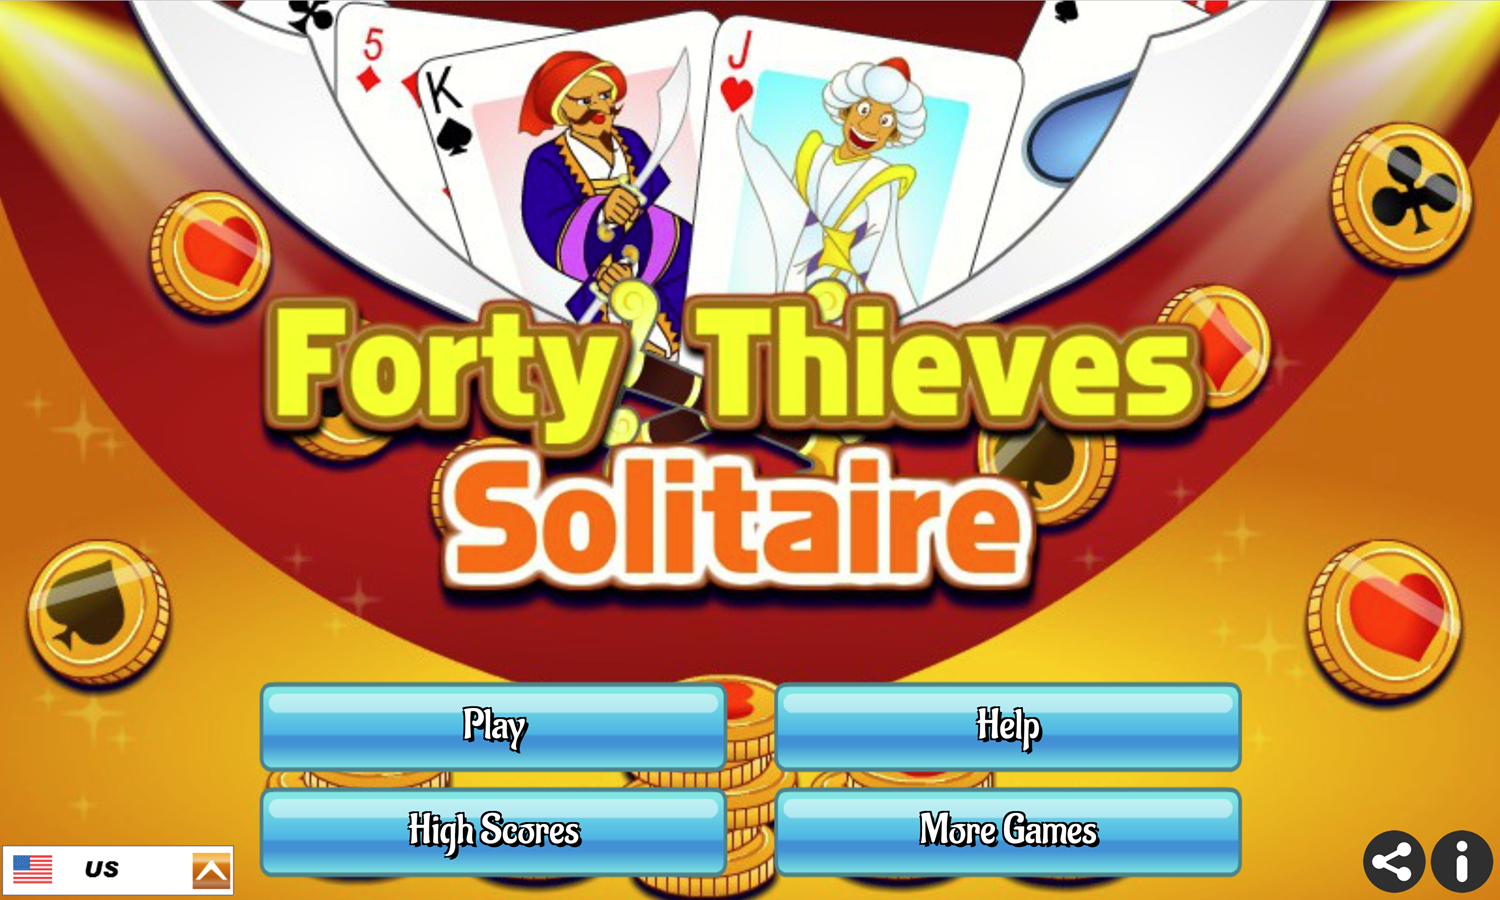 Forty Thieves Solitaire Game Welcome Screen Screenshot.